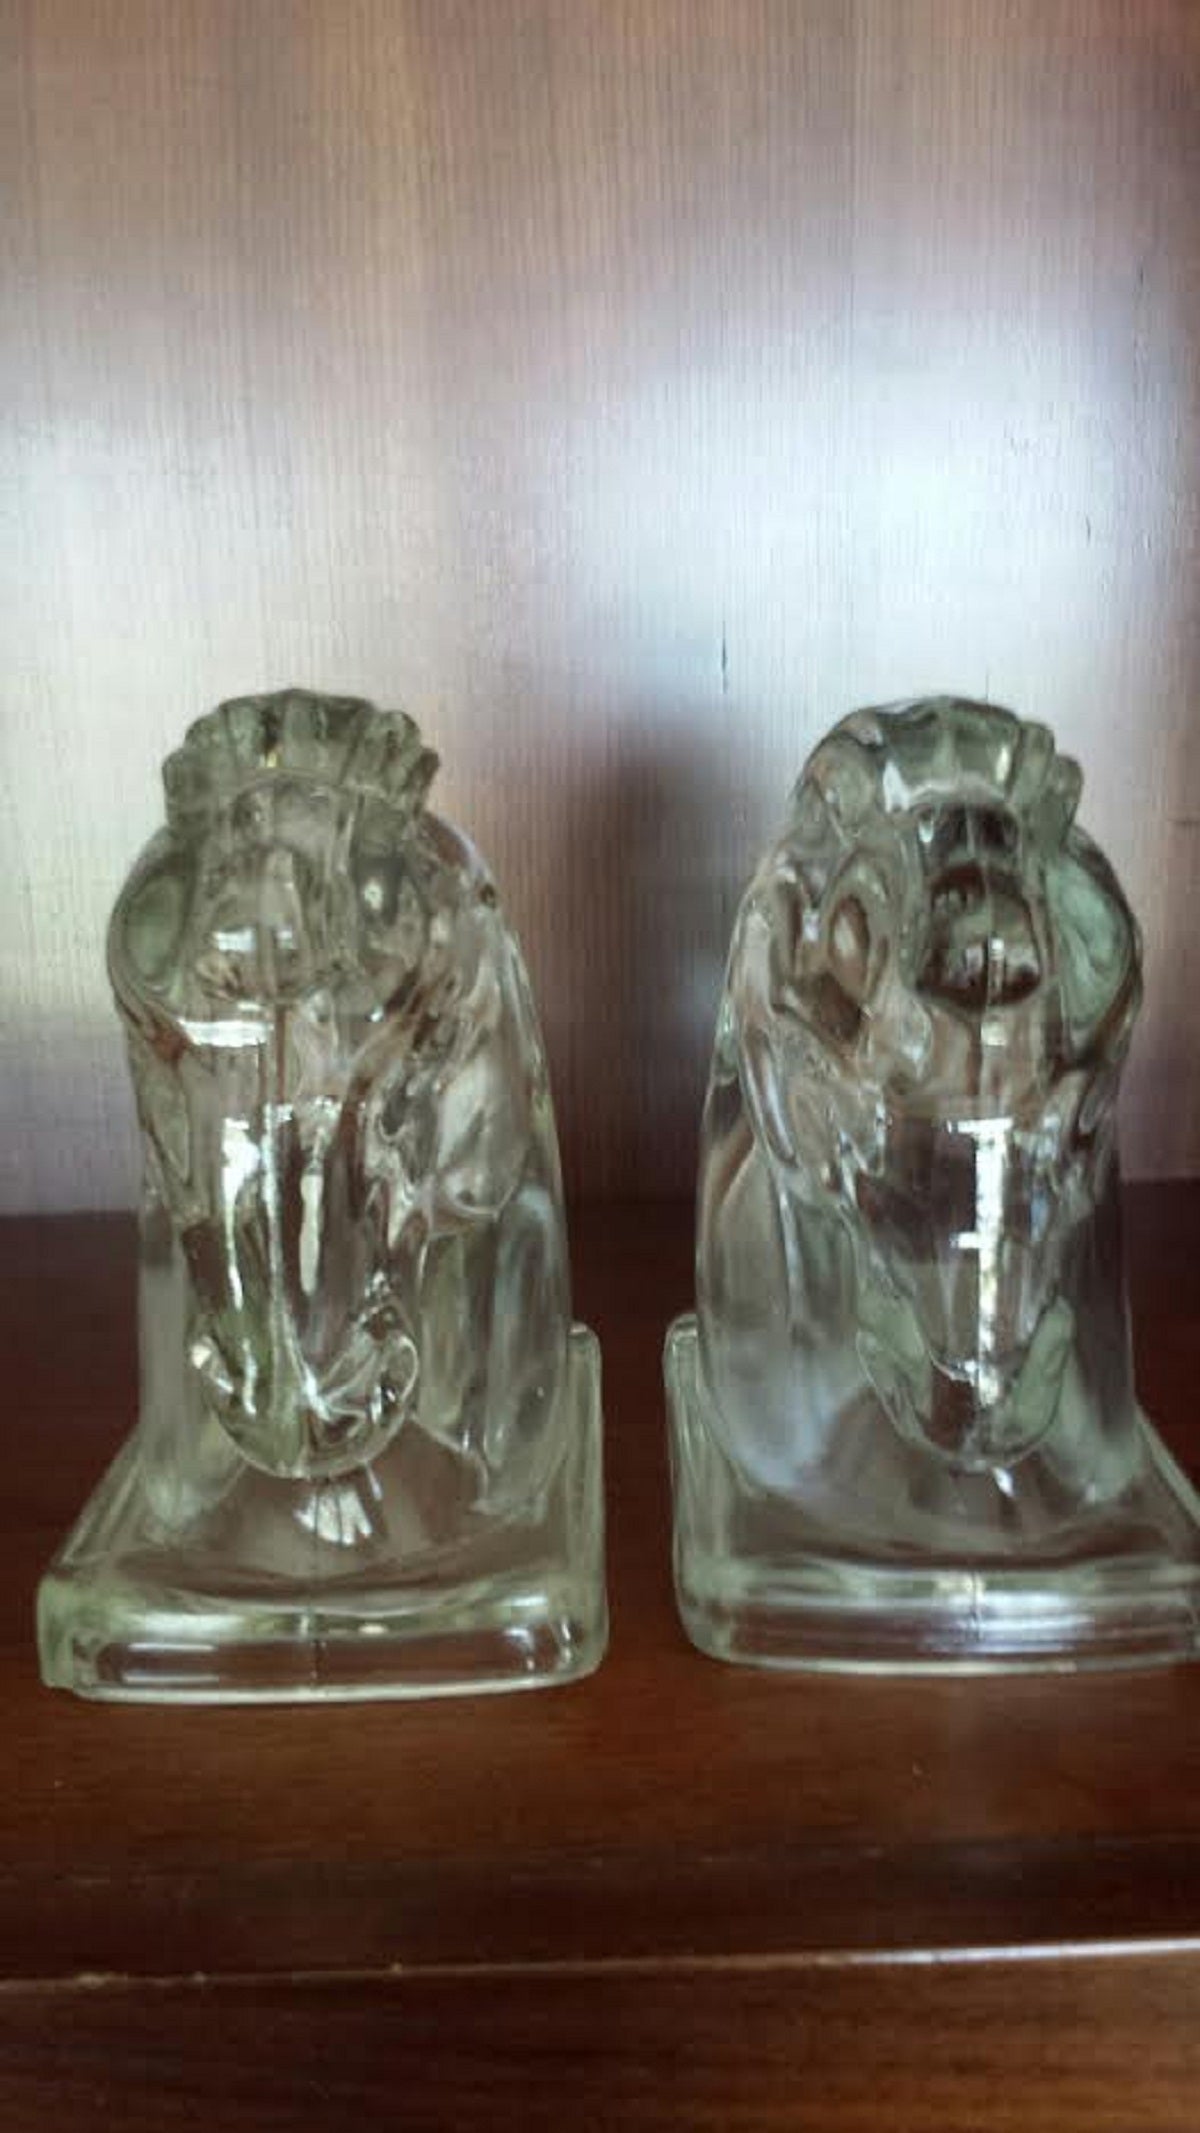 Pair of vintage decorative glass horse heads bookends.